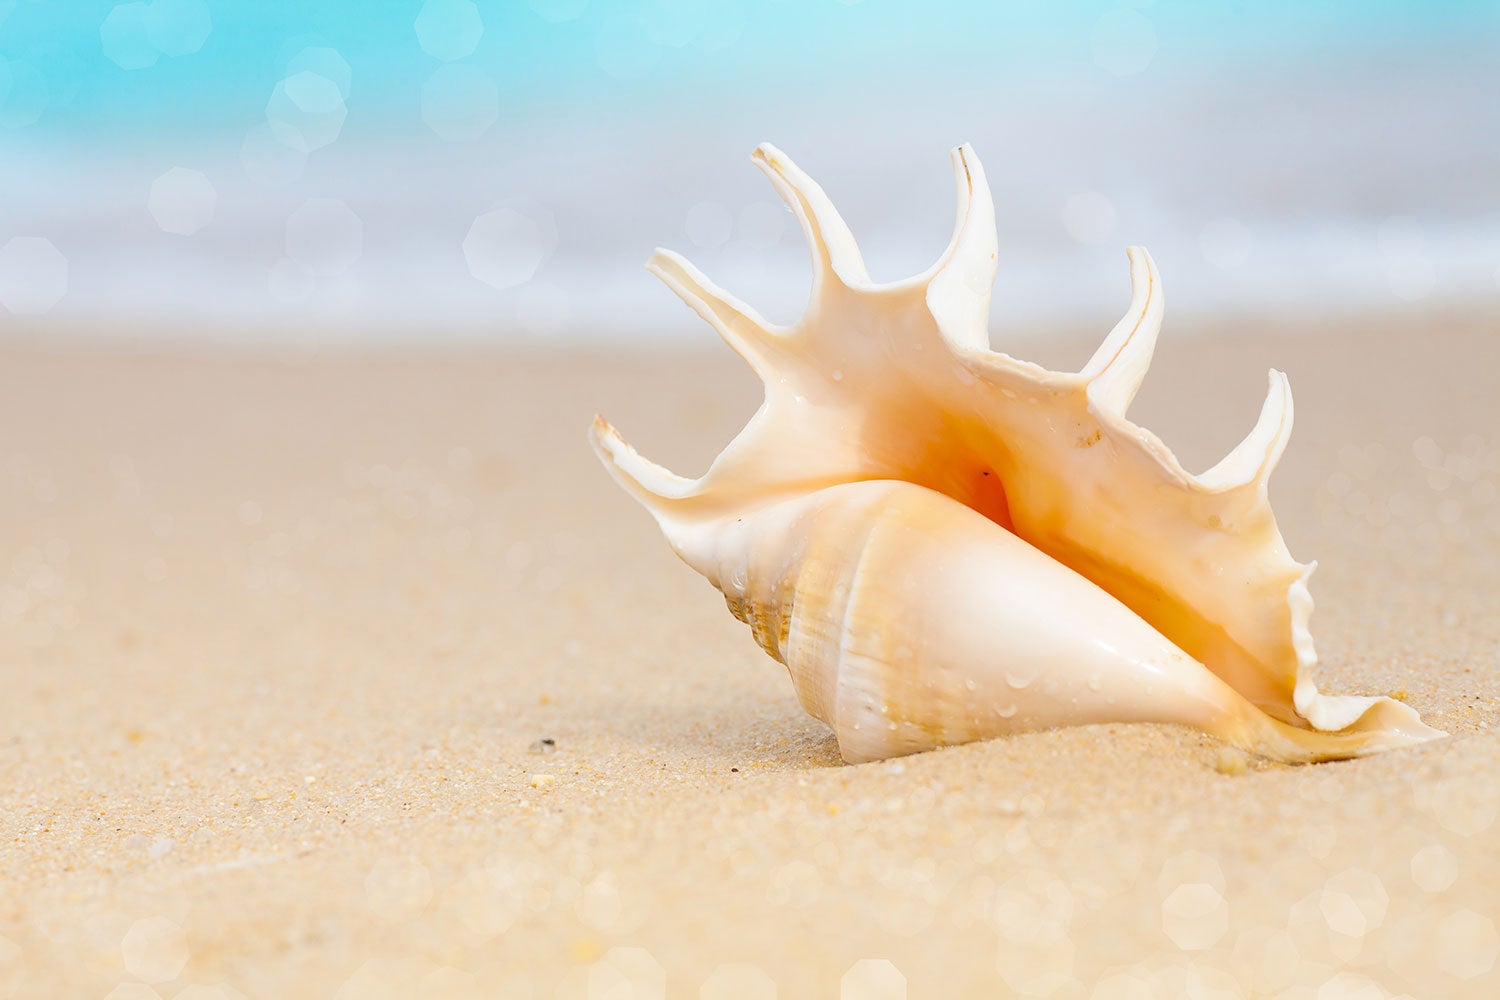 Wall Mural Photo Wallpaper The Shell On The Beach